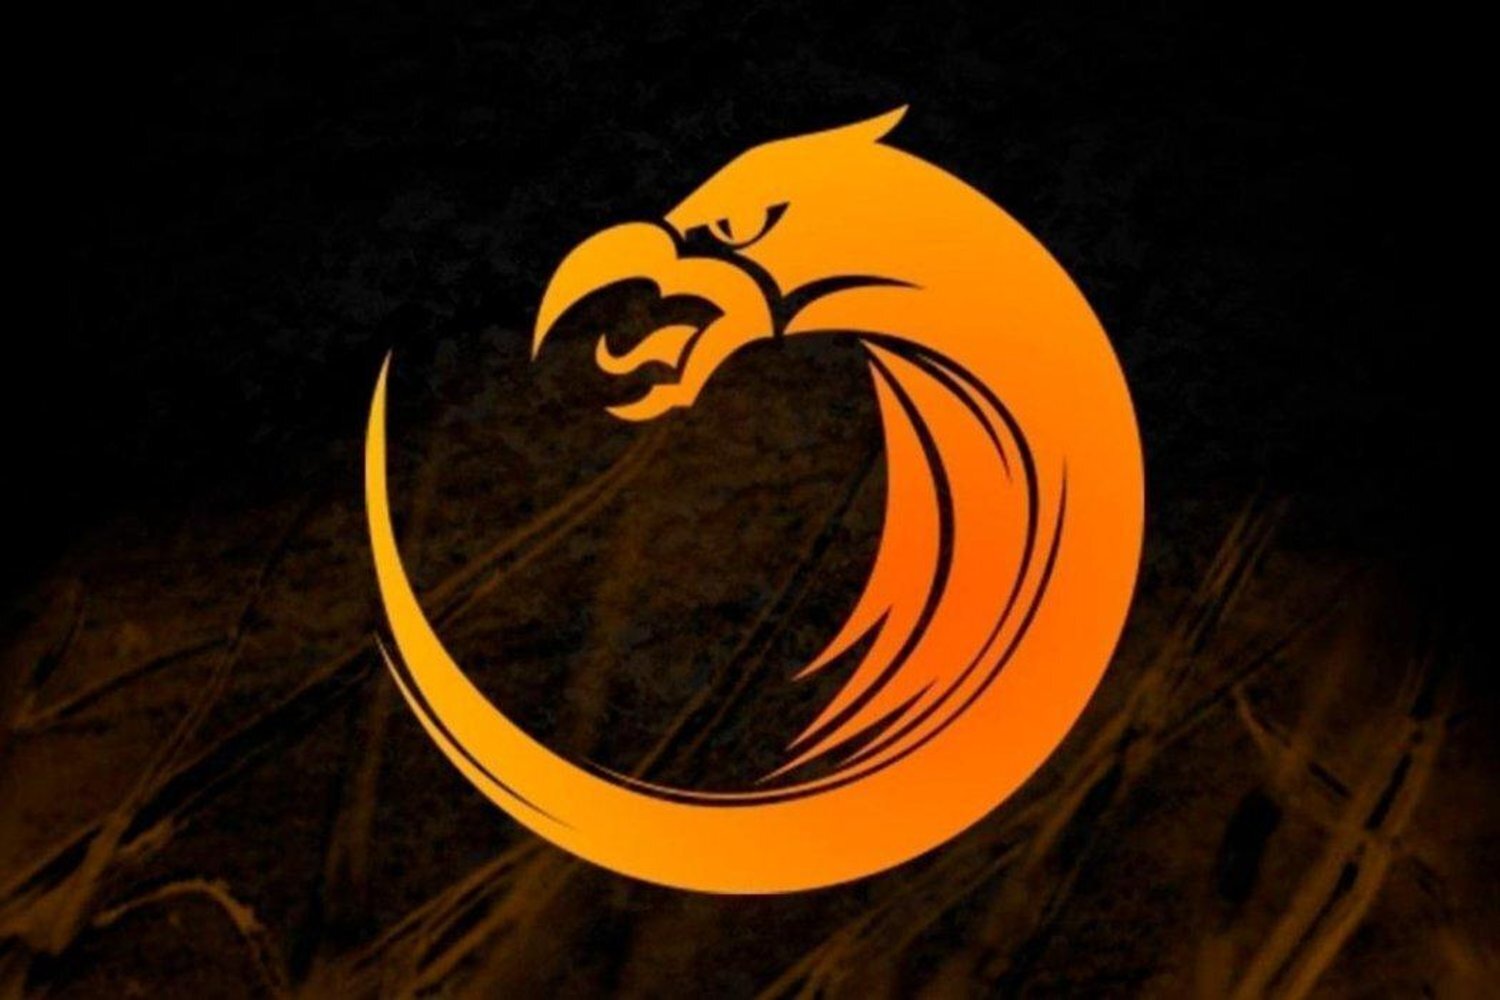 Valve issued a ban that prevents Kuku from attending the Chongqing Major and fined TNC 20% of their DPC points.